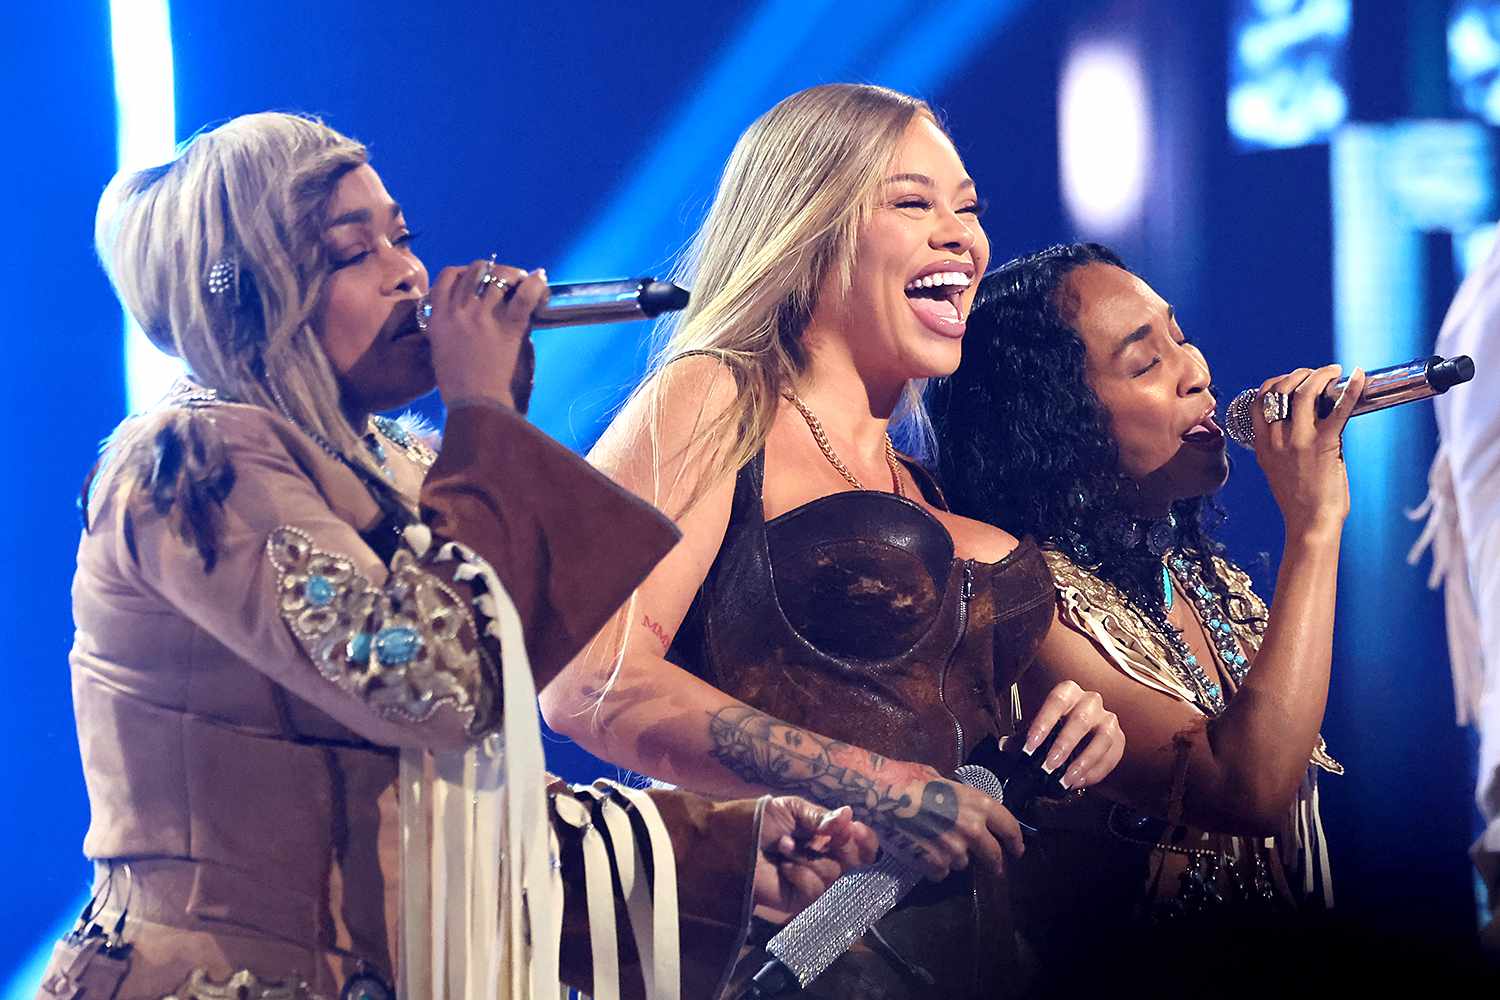 Tionne "T-Boz" Watkins (L) and Rozonda "Chilli" Thomas (R) of TLC perform onstage with Latto (C) during the 2024 iHeartRadio Music Awards at Dolby Theatre on April 01, 2024 in Hollywood, California.